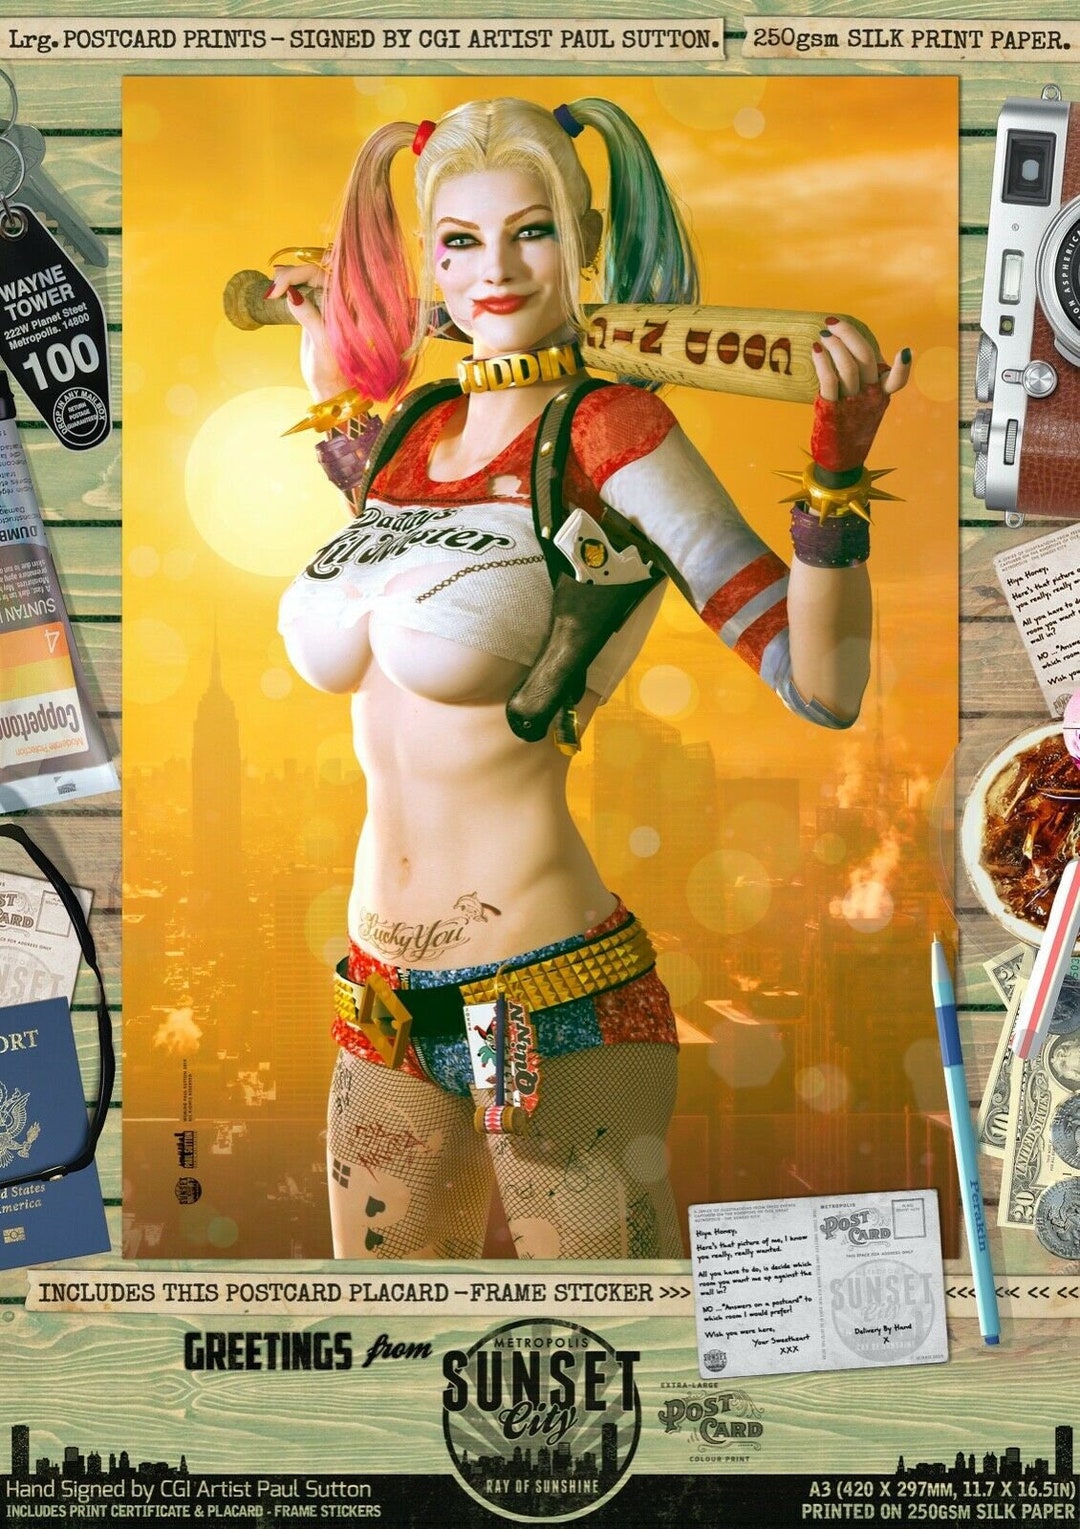 Suicide Squad Film Posters - Harley Quinn - Option 1 - A3 & A4